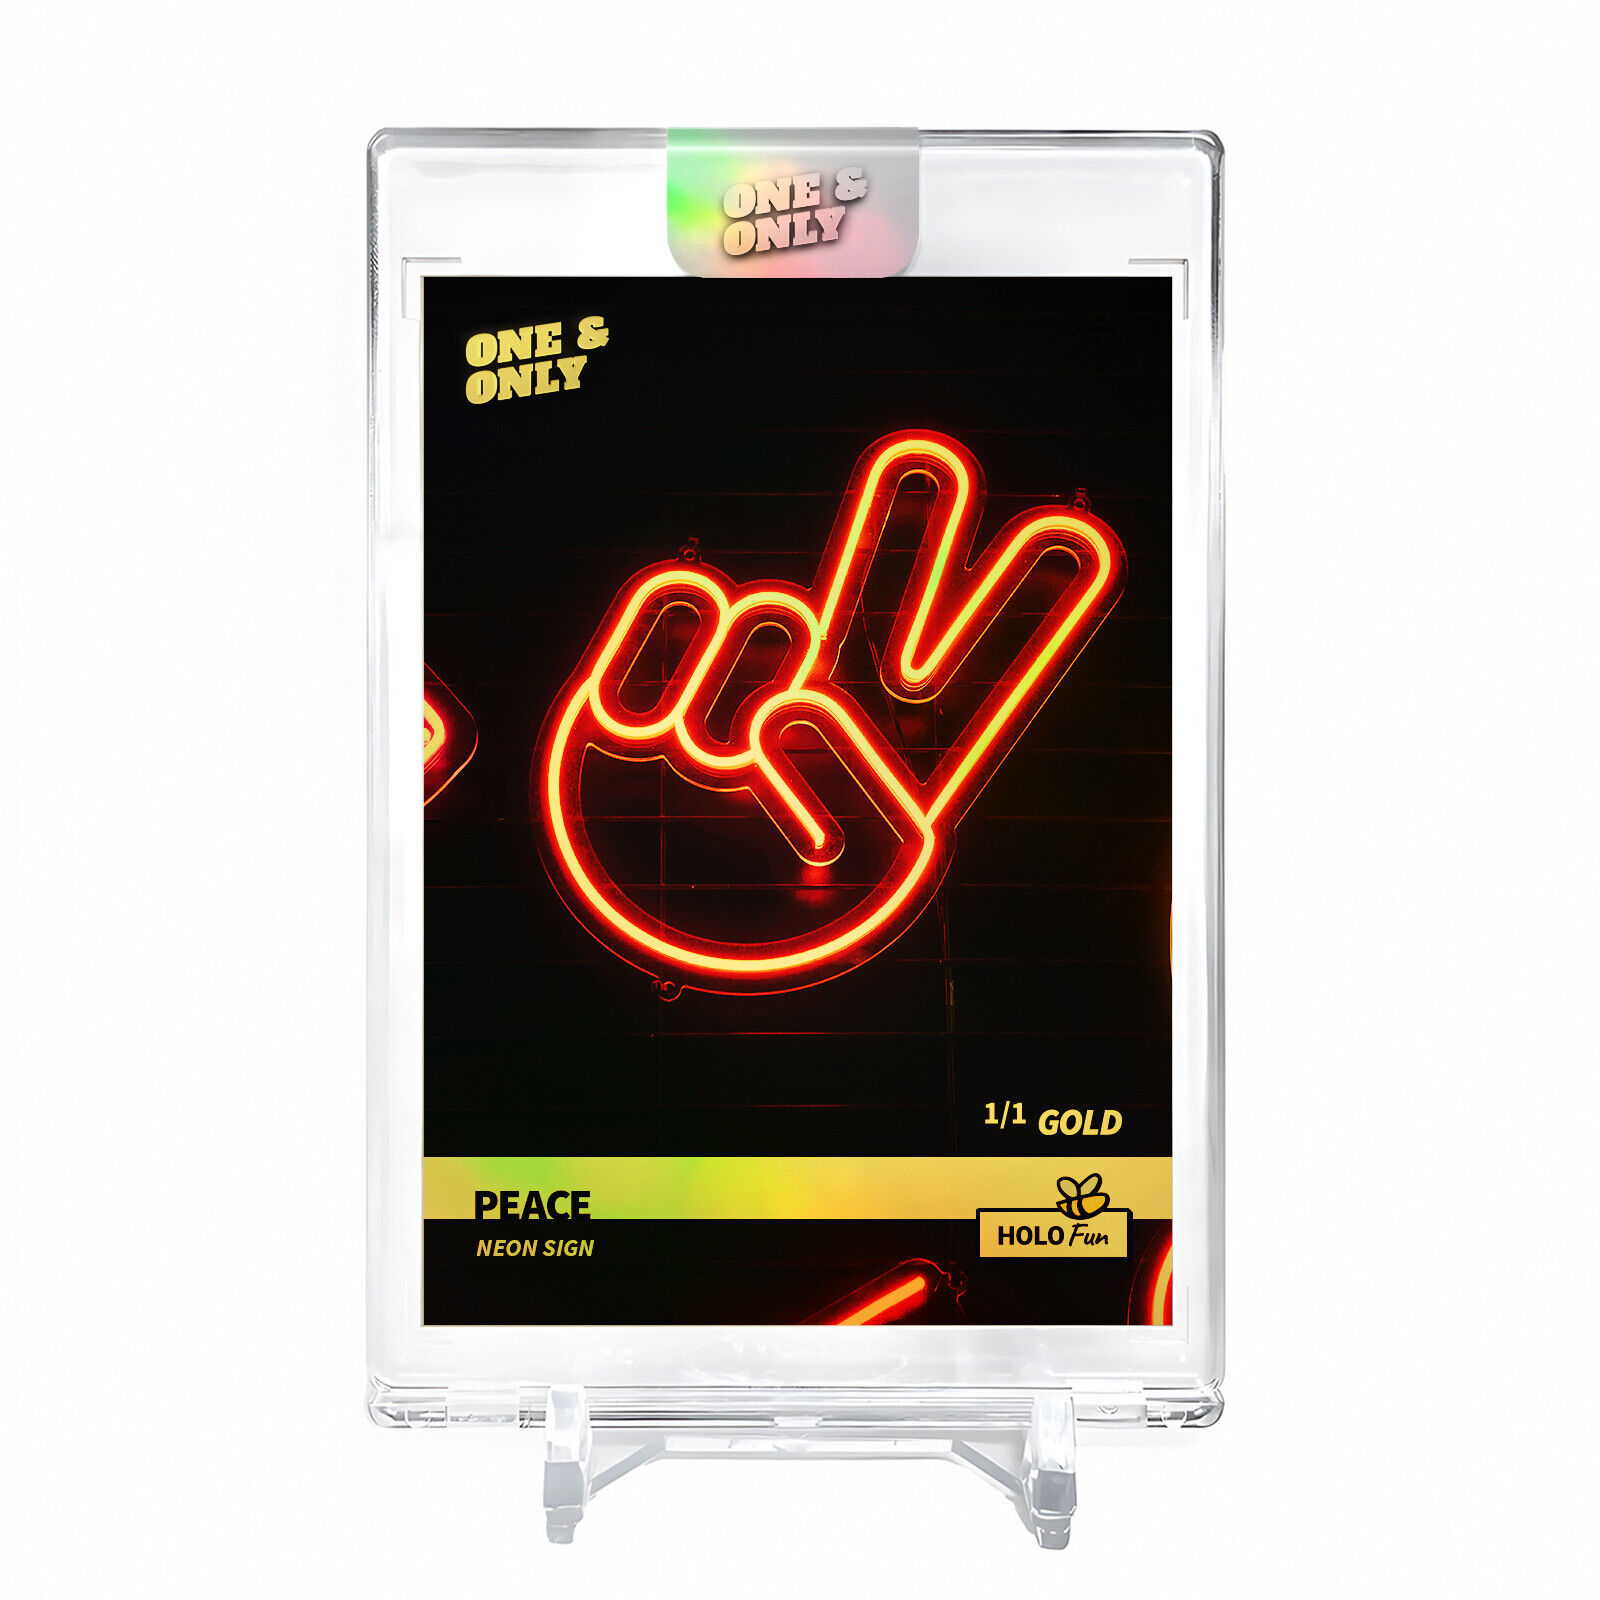 PEACE SIGN Neon Sign Card 2023 GleeBeeCo Holographic #PCNN *GOLD* Encased 1/1